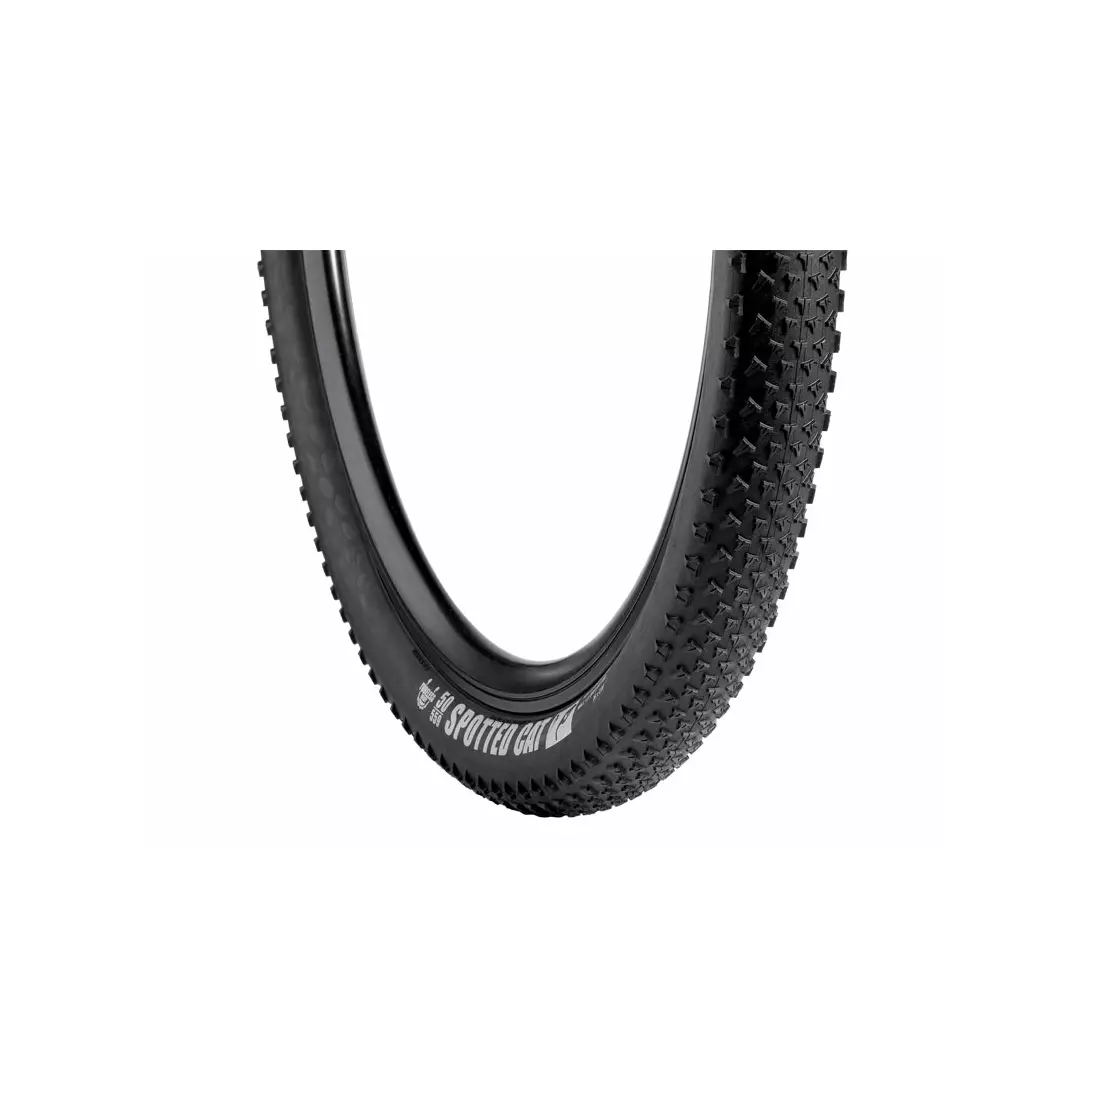 VREDESTEIN SPOTTED CAT SUPERLITE Mtb bicycle tyre 29x2.20 (55-622) TPI120 485g black coiled VRD-29228